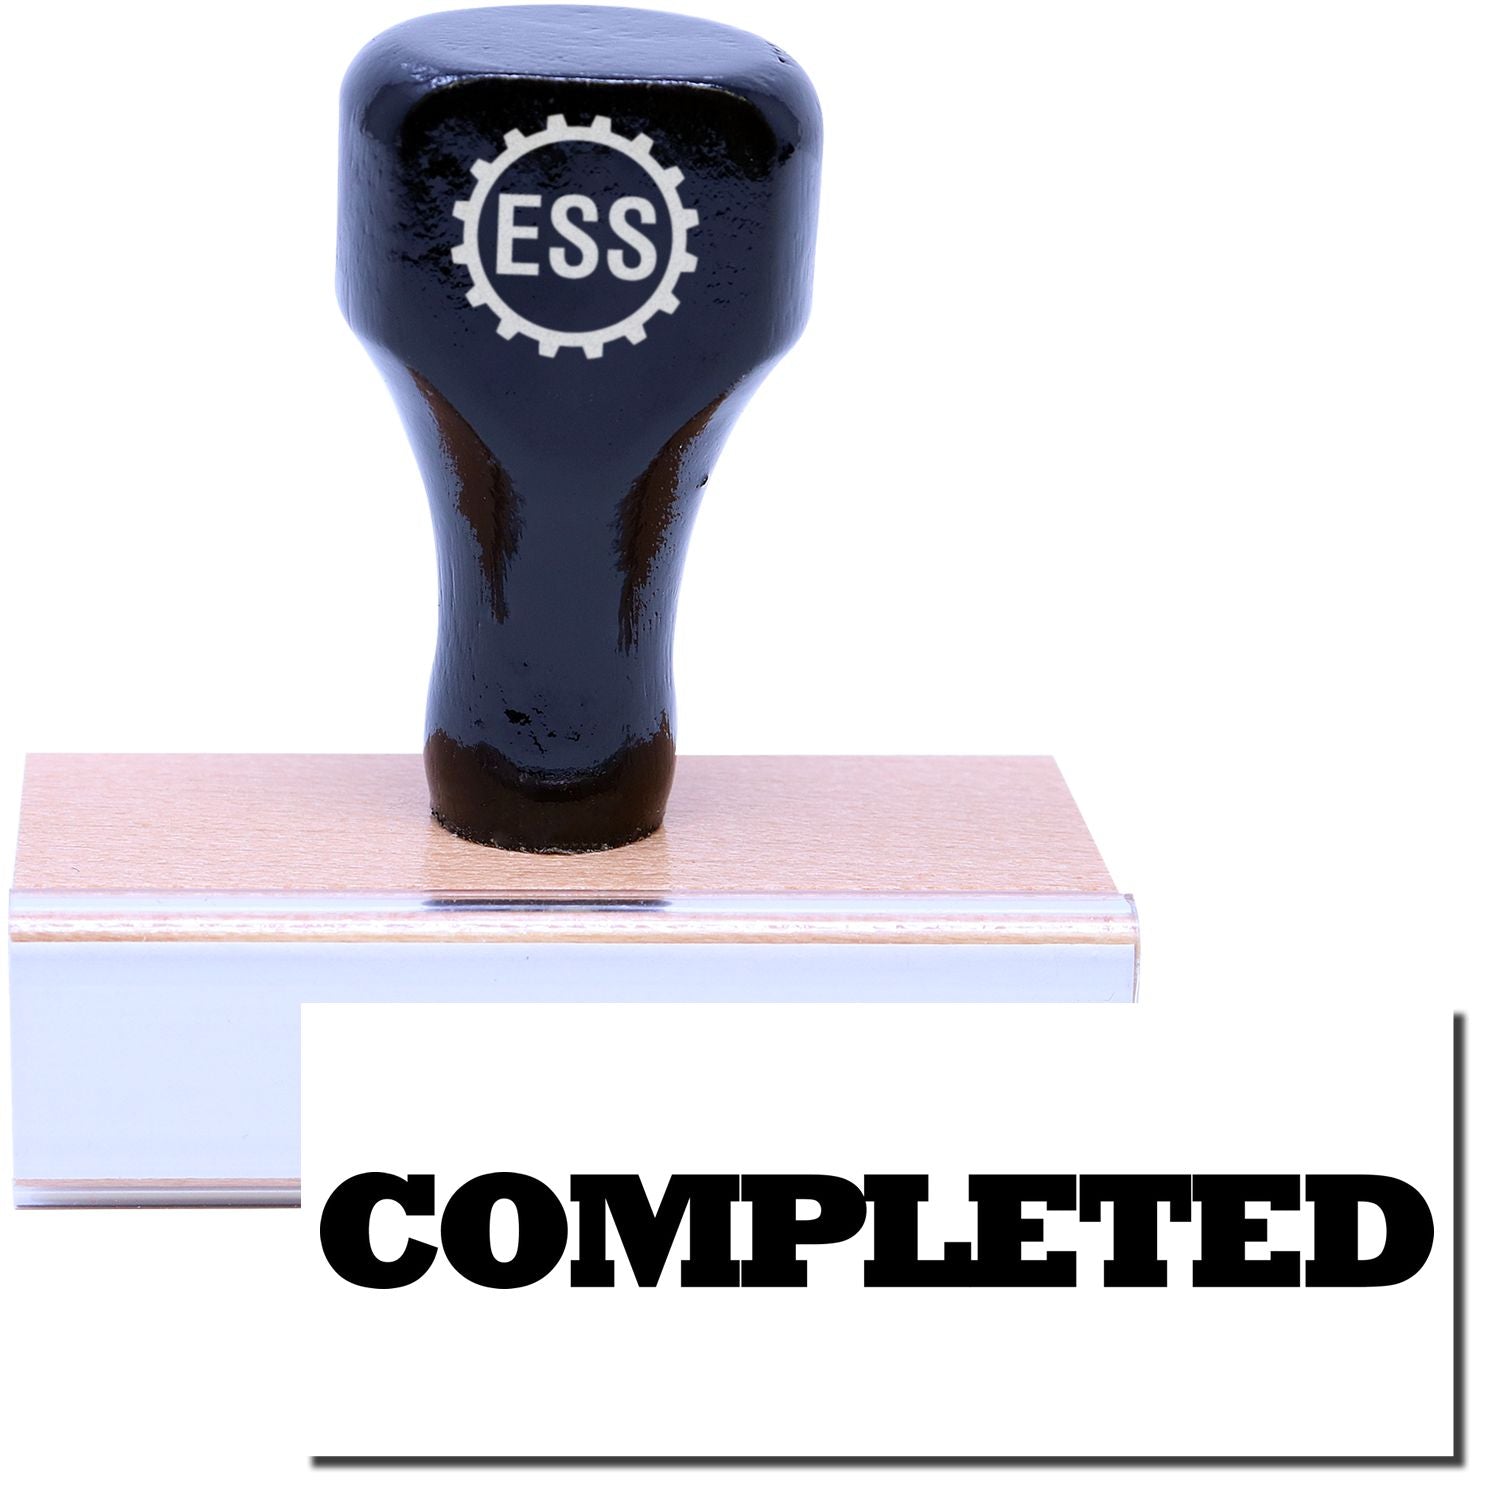 A stock office rubber stamp with a stamped image showing how the text "COMPLETED" in bold font is displayed after stamping.